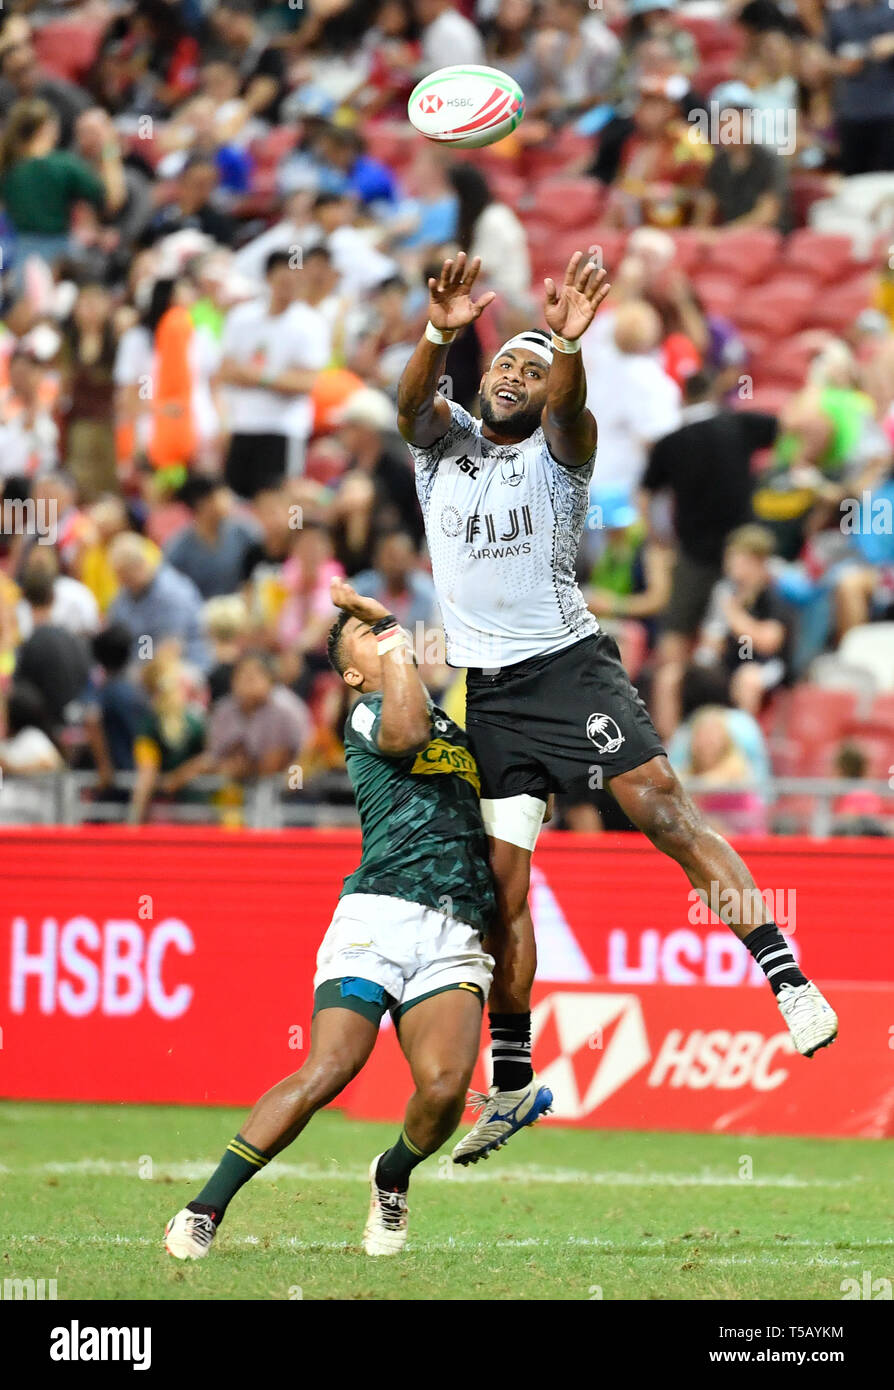 Fijis Vilimoni Botitu catches a high ball during the HSBC Singapore Rugby Sevens Cup Final